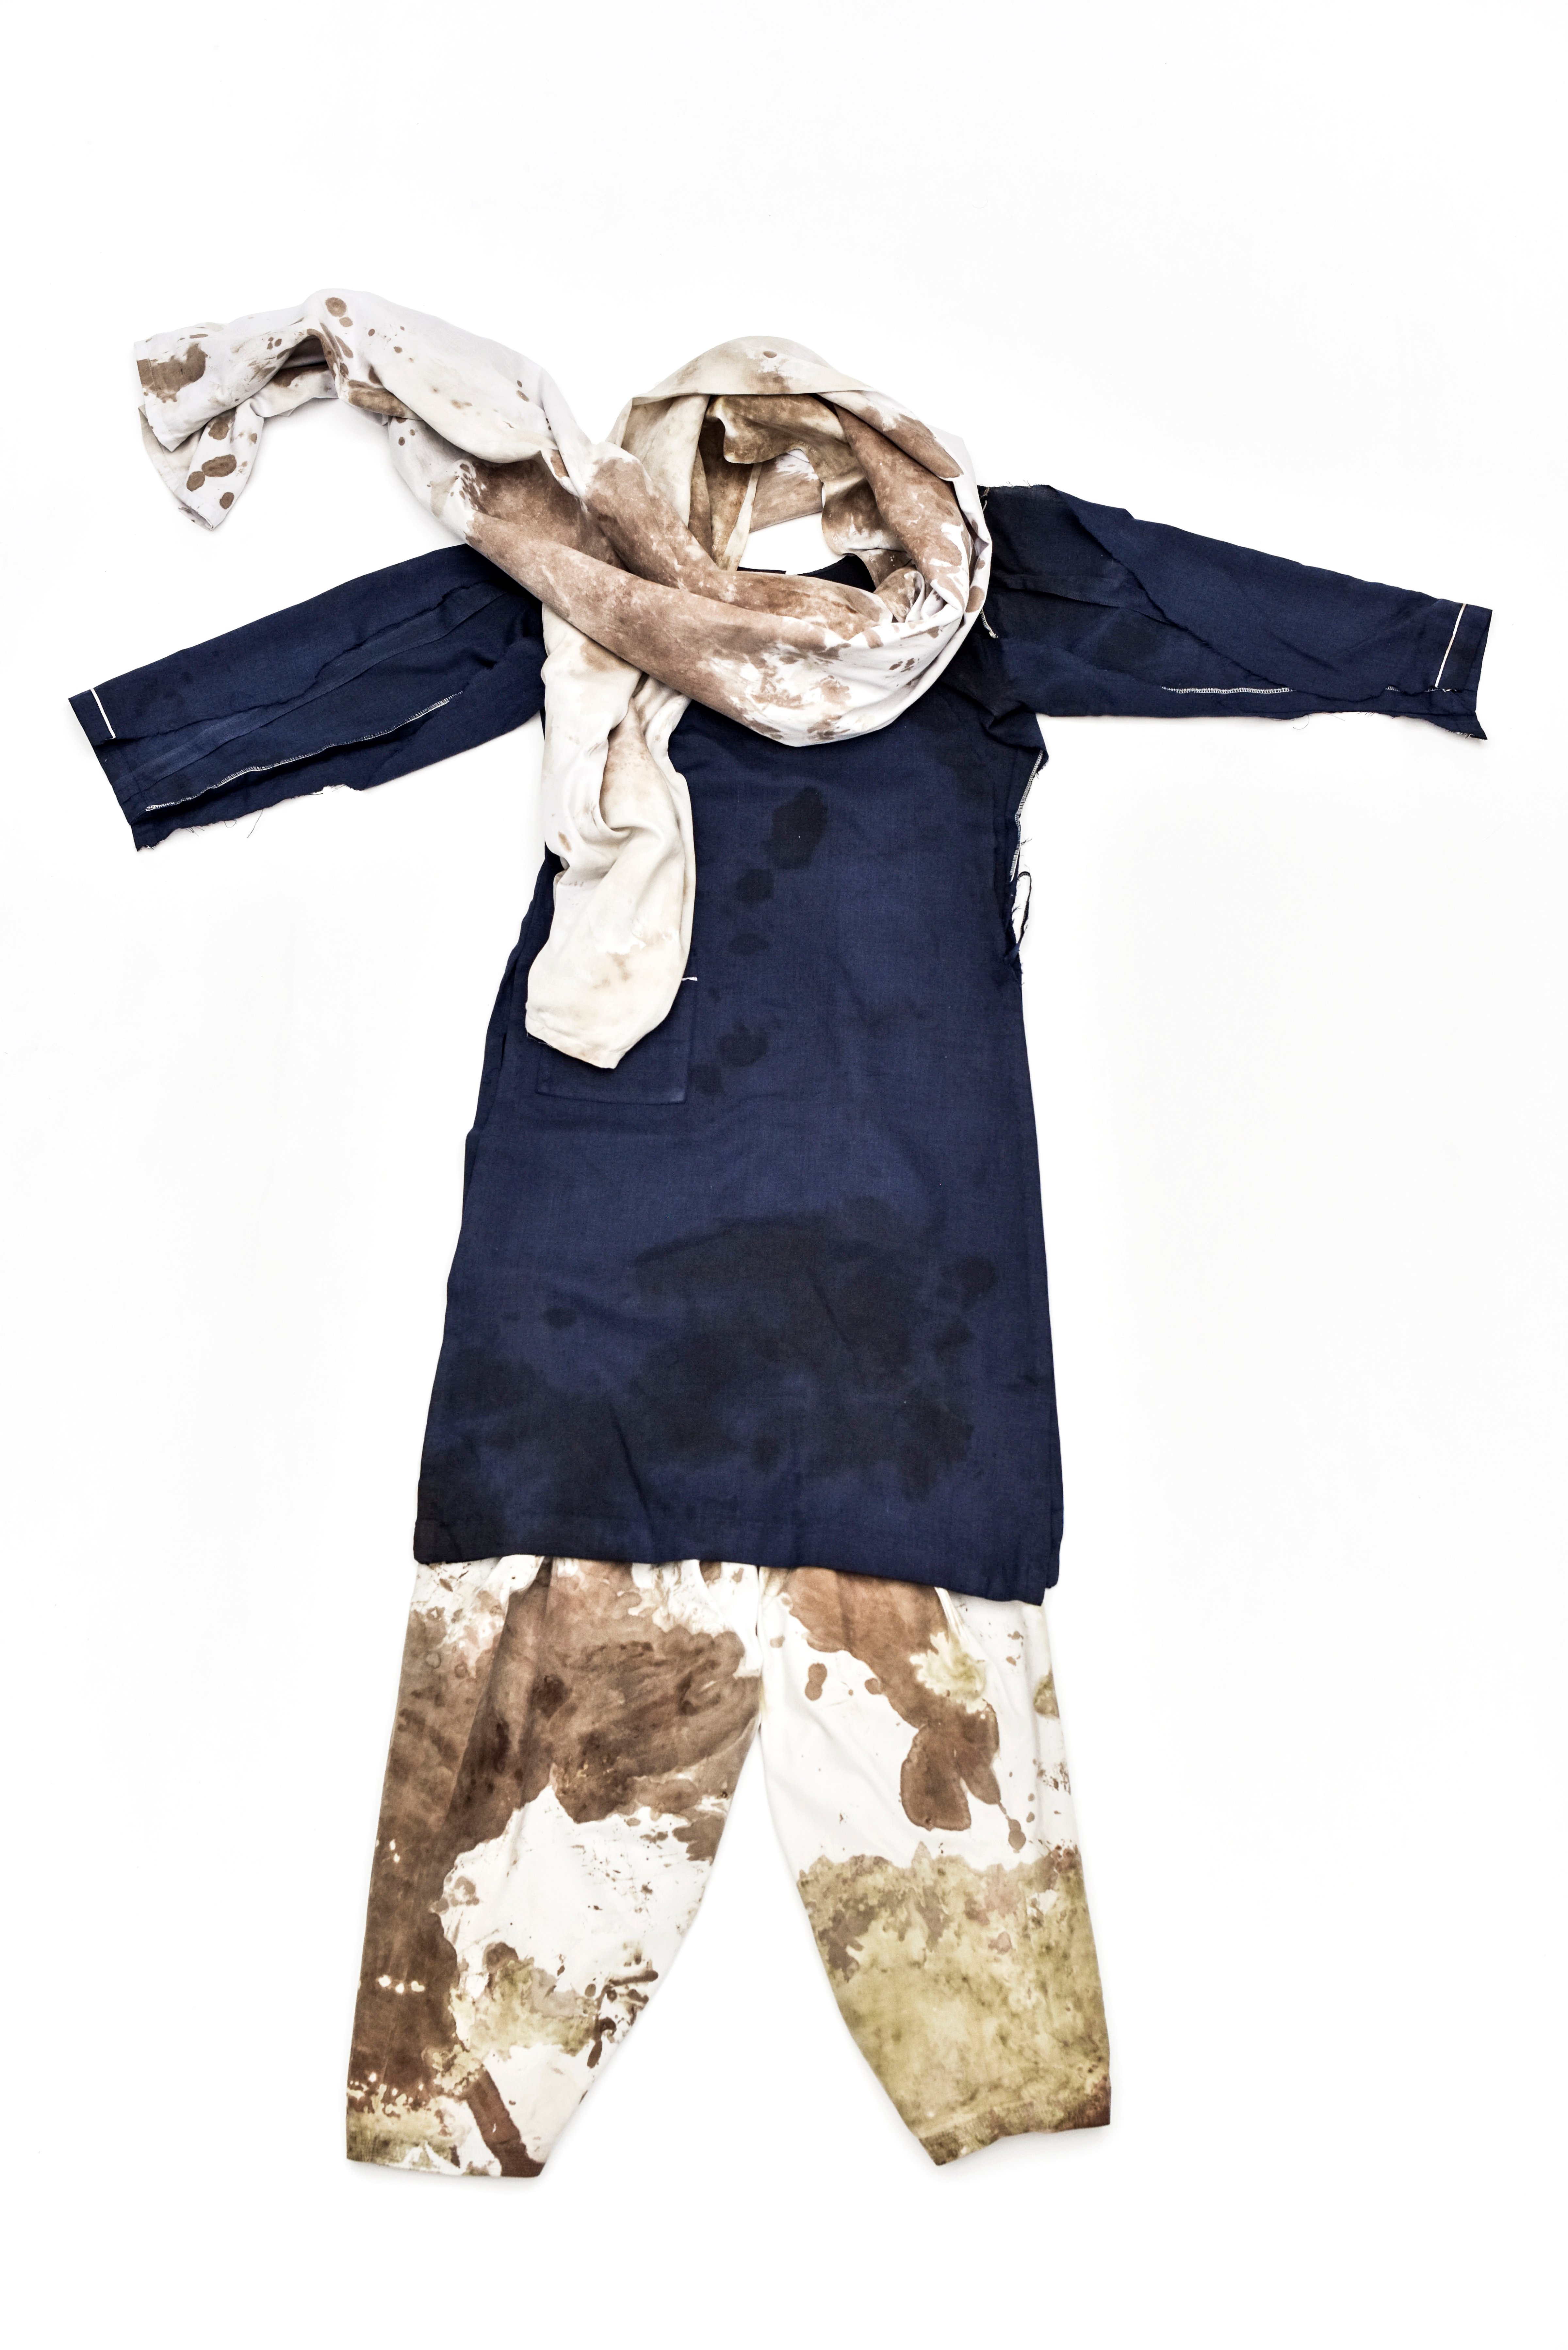 The school uniform of Malala Yousafzai, Nobel Peace Prize laureate 2014. Malala was wearing the uniform on the day she was shot in the head by the Taliban while on the school bus in Swat, Pakistan, on Oct. 2012. (Lynsey Addario—Reportage by Getty Images for the Nobel Peace Center)